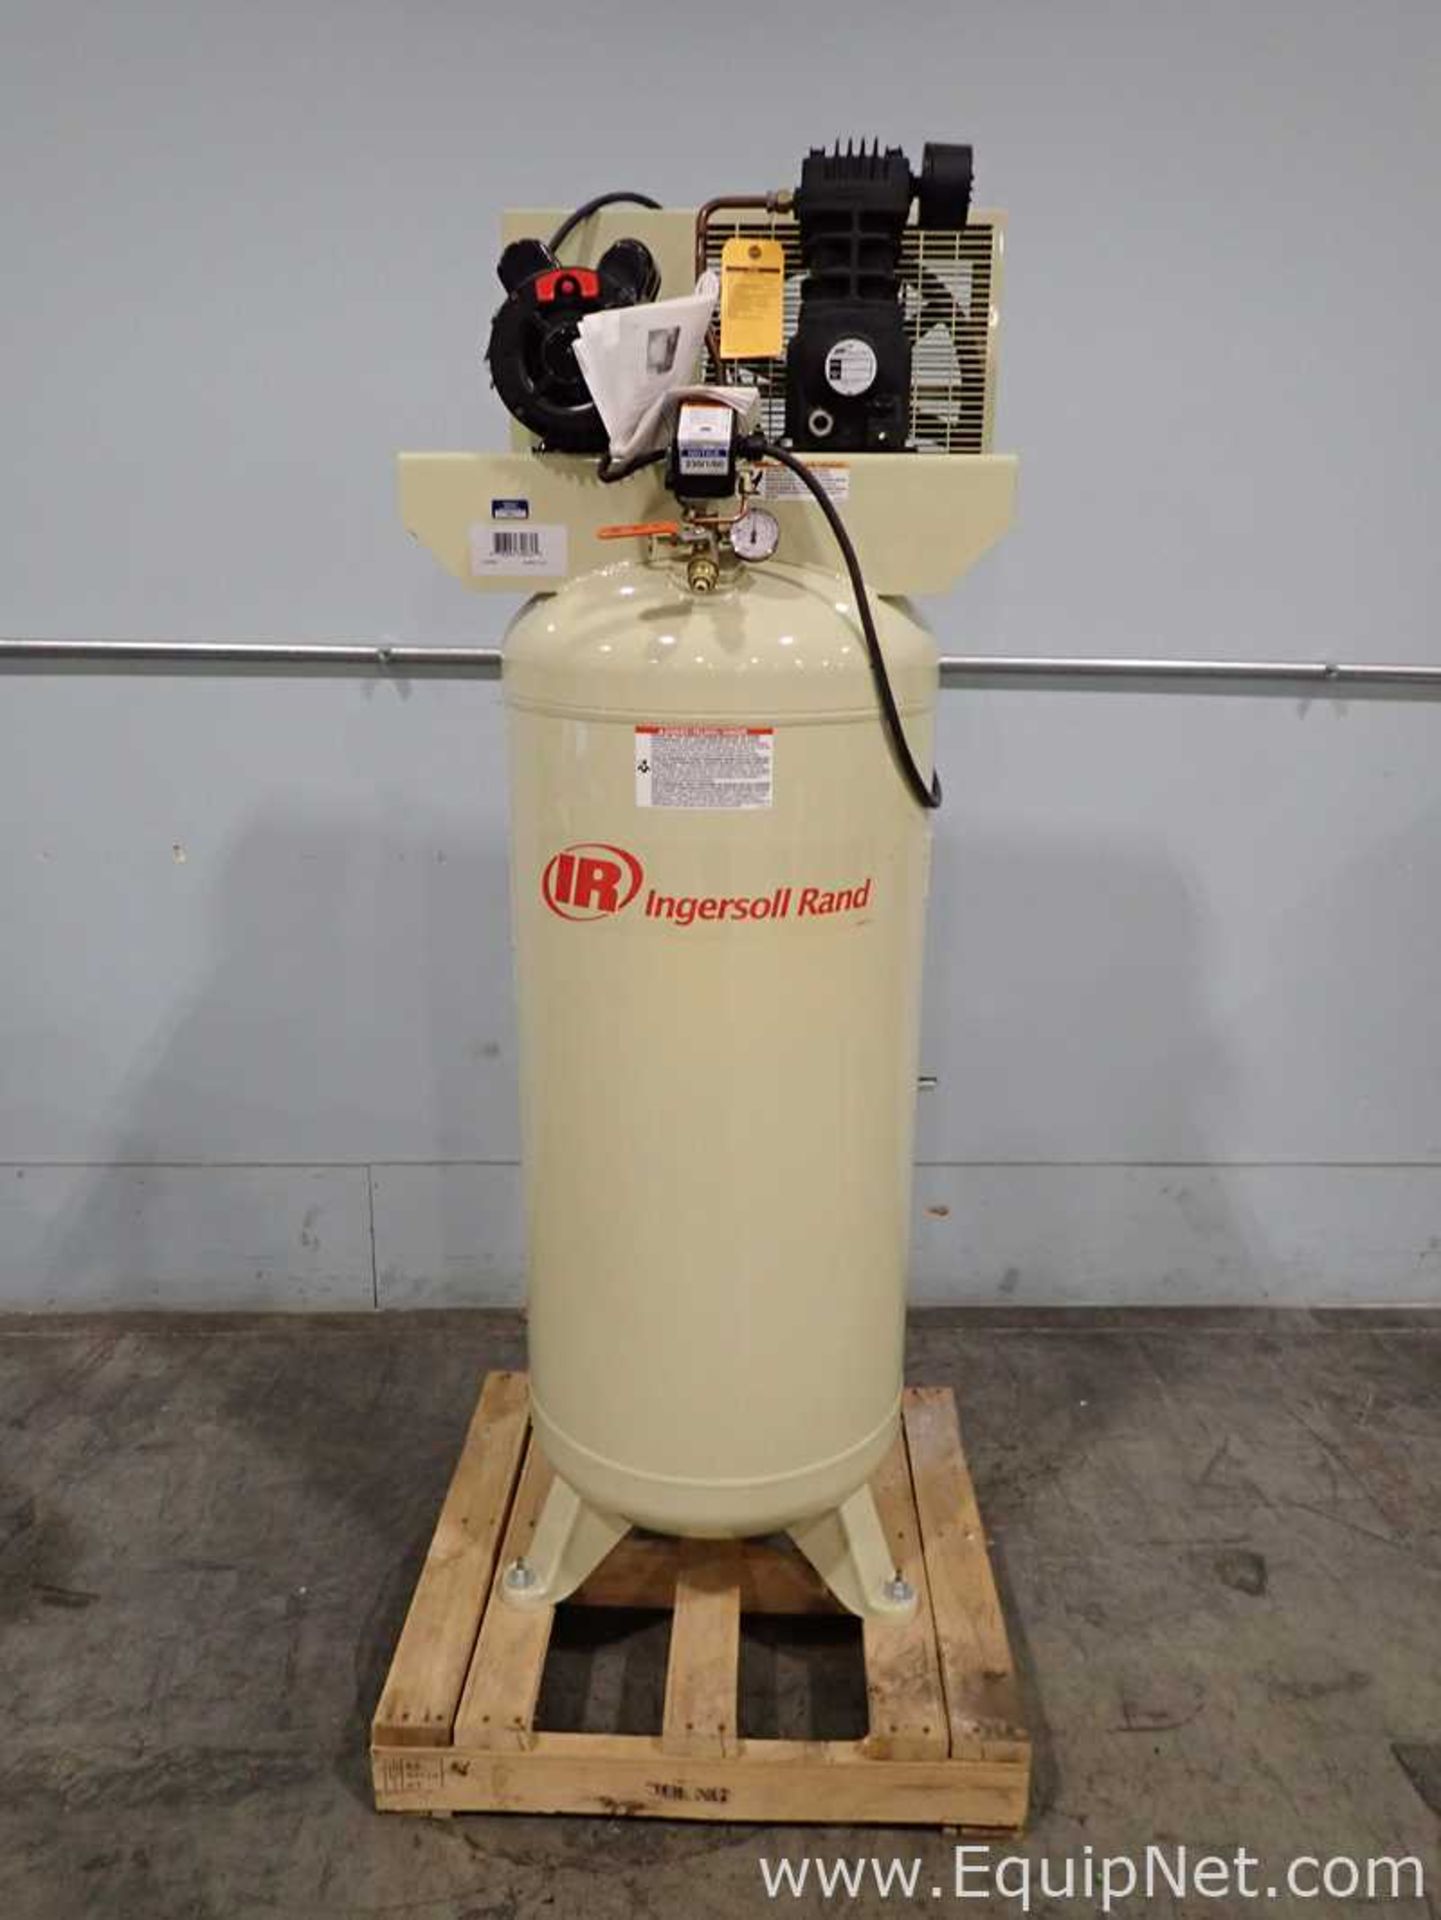 Ingersoll Rand SS3660V with Kit 60 Gallon Air Compressor